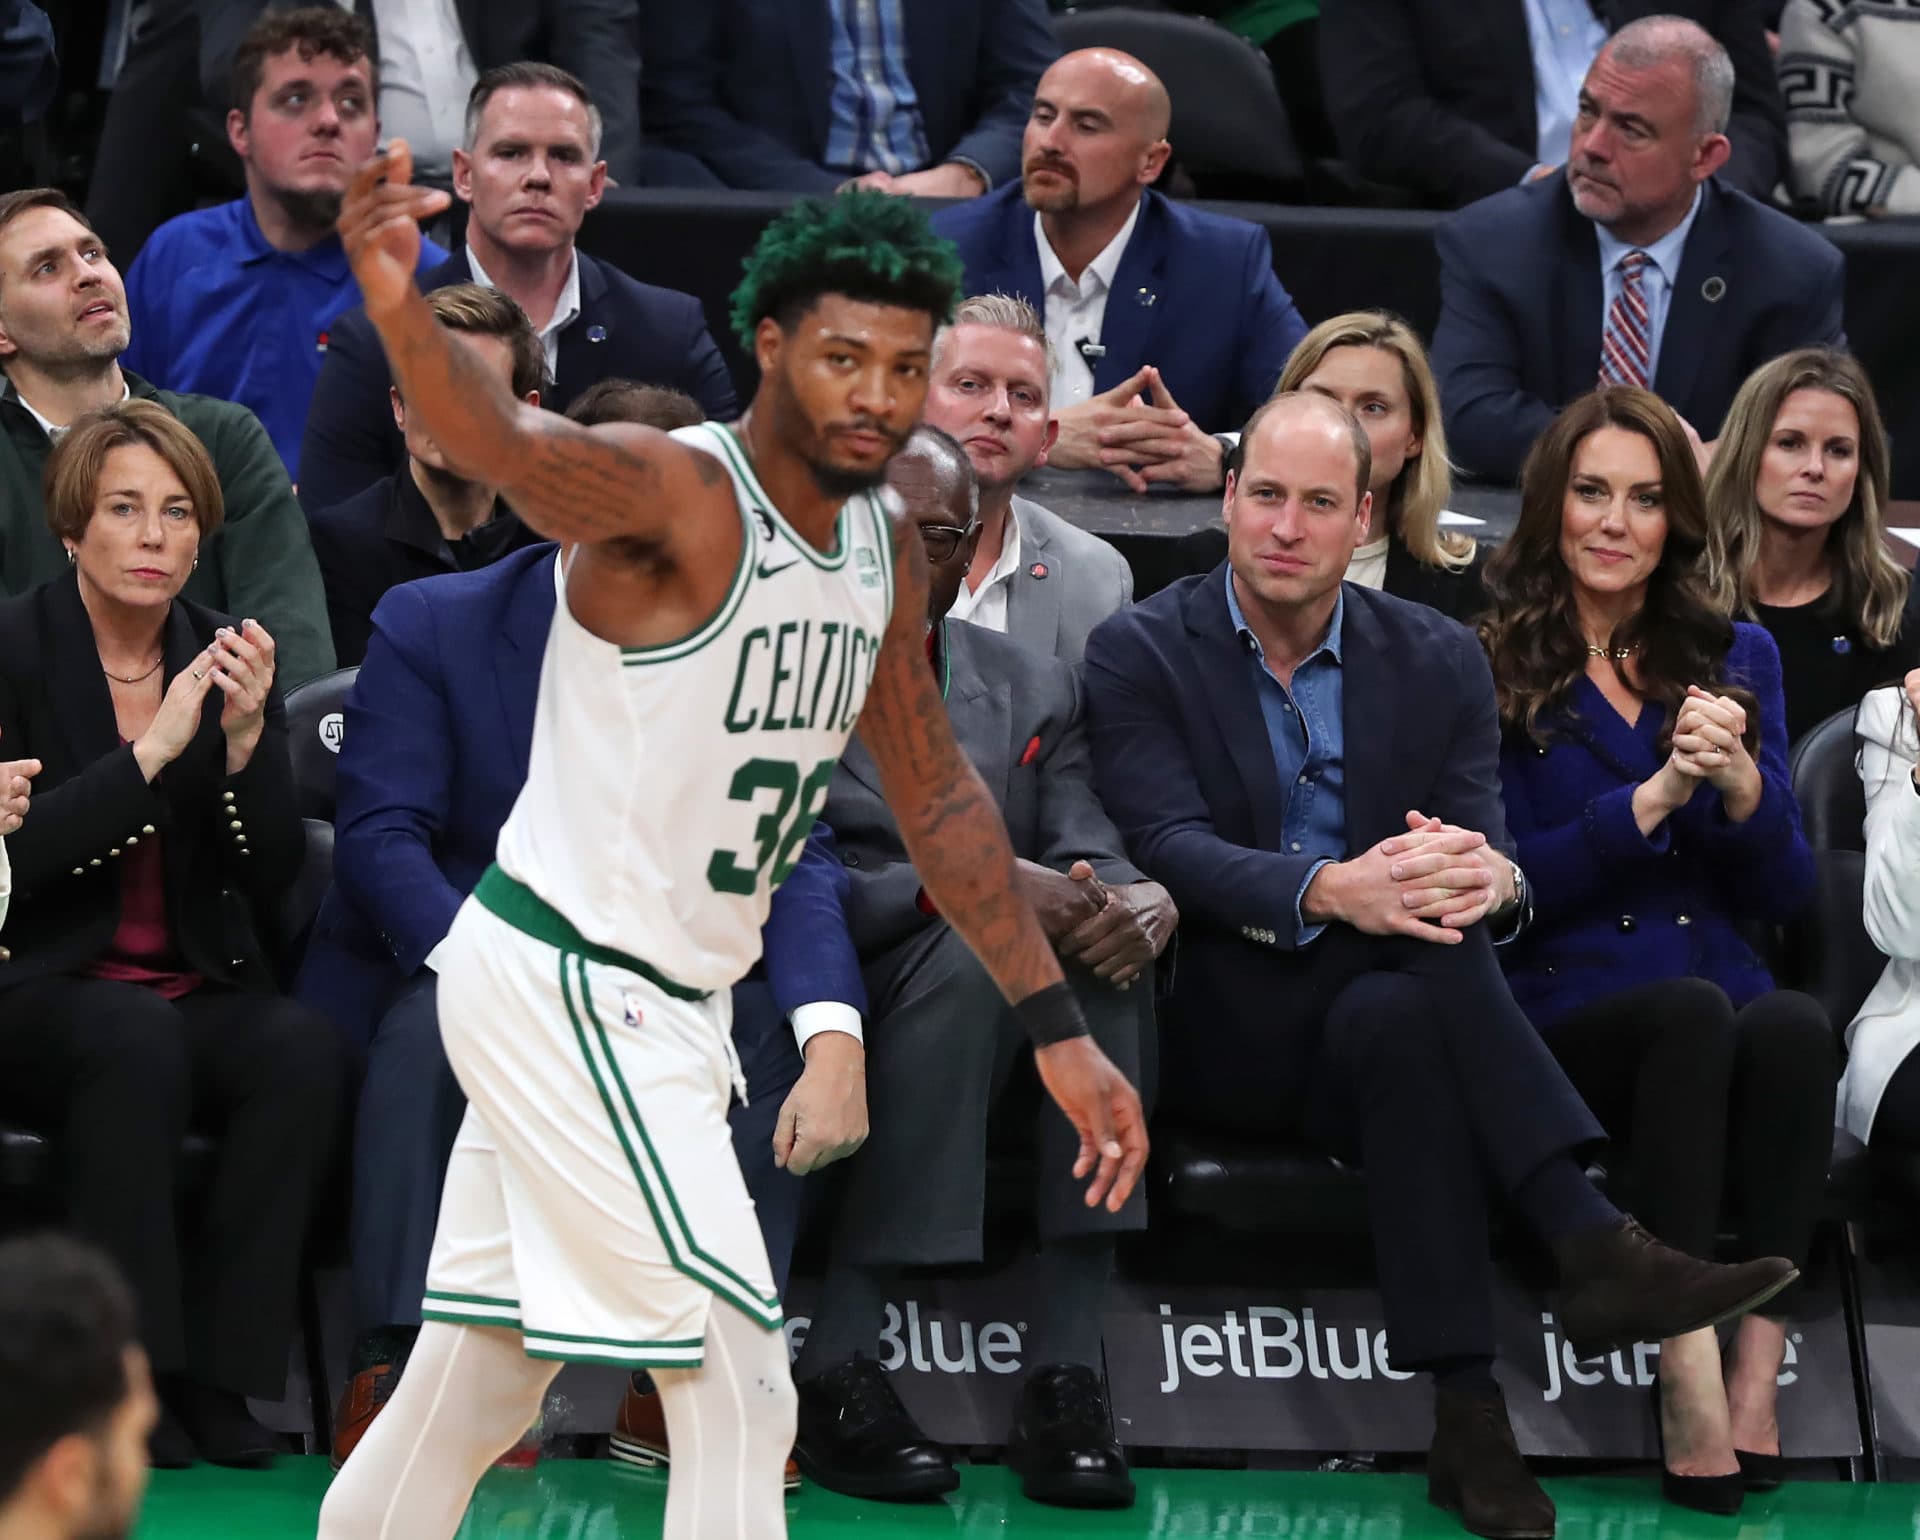 Governor-Elect Maura Healey, left, Prince William and Kate look on as Boston Celtics PG Marcus Smart gestures in front of them on the court. (Jim Davis/The Boston Globe via Getty Images)